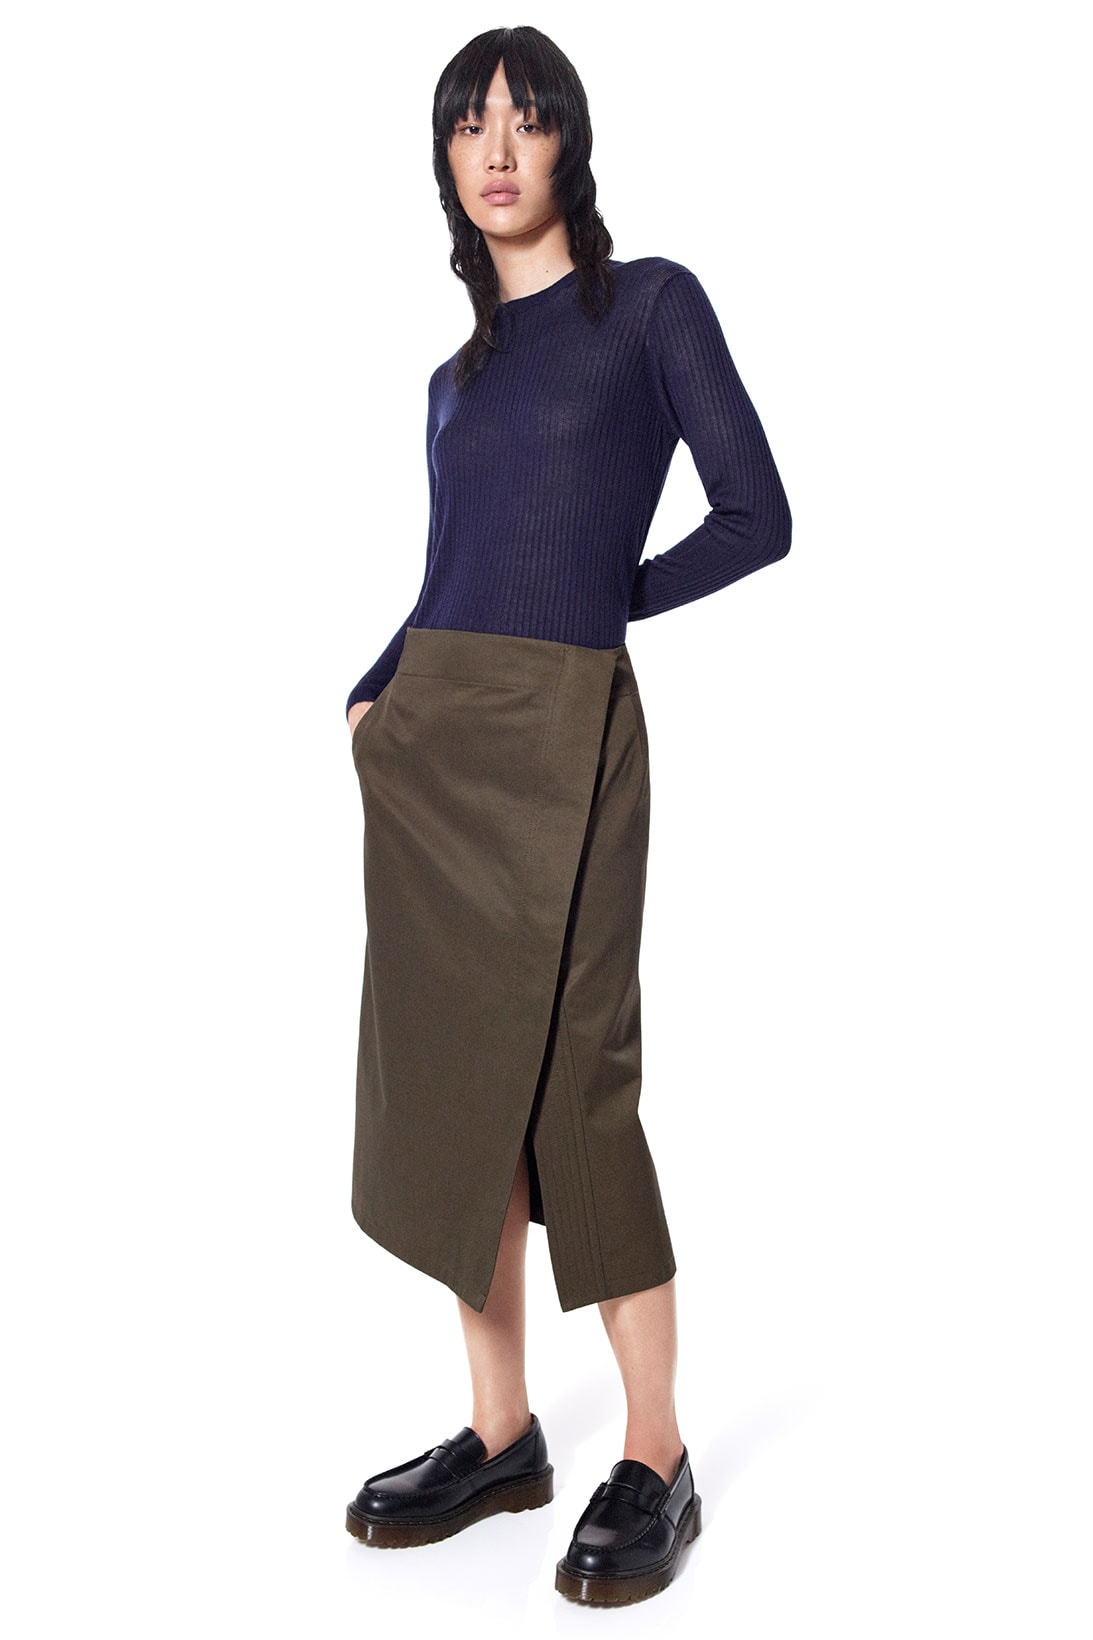 jil sander uniqlo plus j spring summer ss21 collaboration collection ribbed knit top skirt